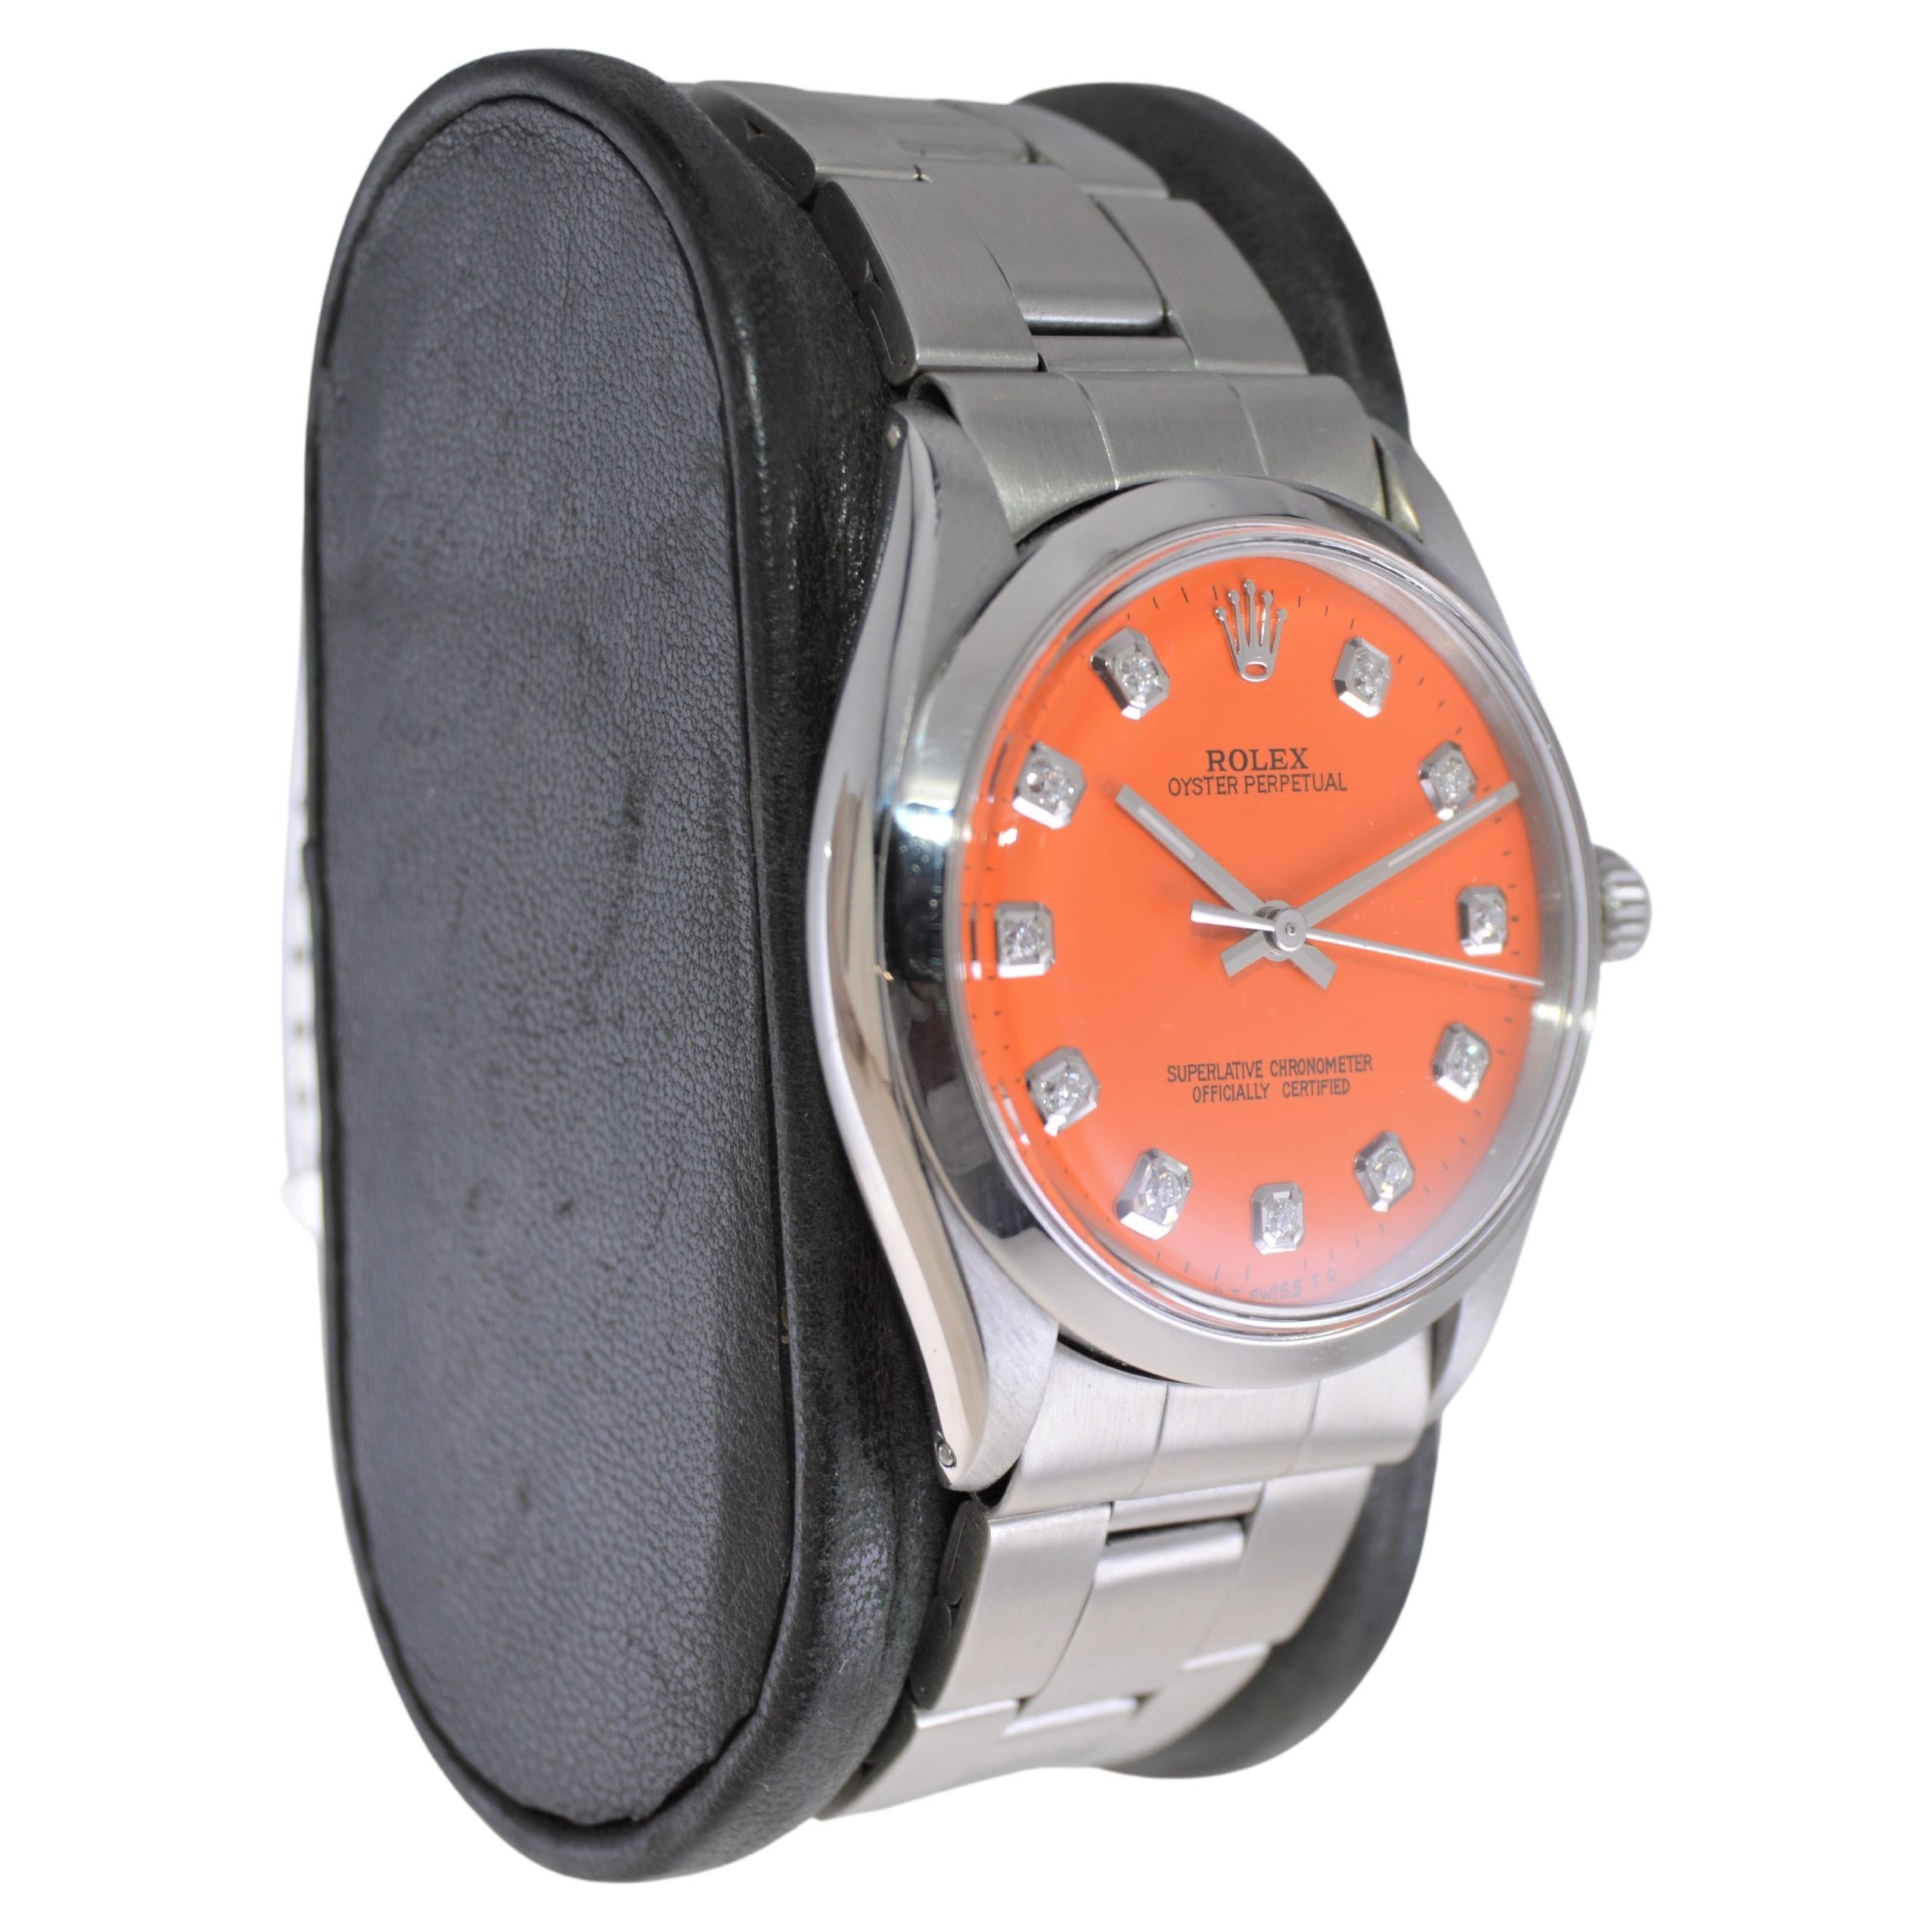 FACTORY / HOUSE: Rolex Watch Company
STYLE / REFERENCE: Oyster Perpetual / Reference 1002
METAL / MATERIAL: Stainless Steel 
CIRCA / YEAR: 1960's
DIMENSIONS / SIZE: Length 39mm X Diameter 34mm
MOVEMENT / CALIBER: Perpetual Winding / Jewels 26 /